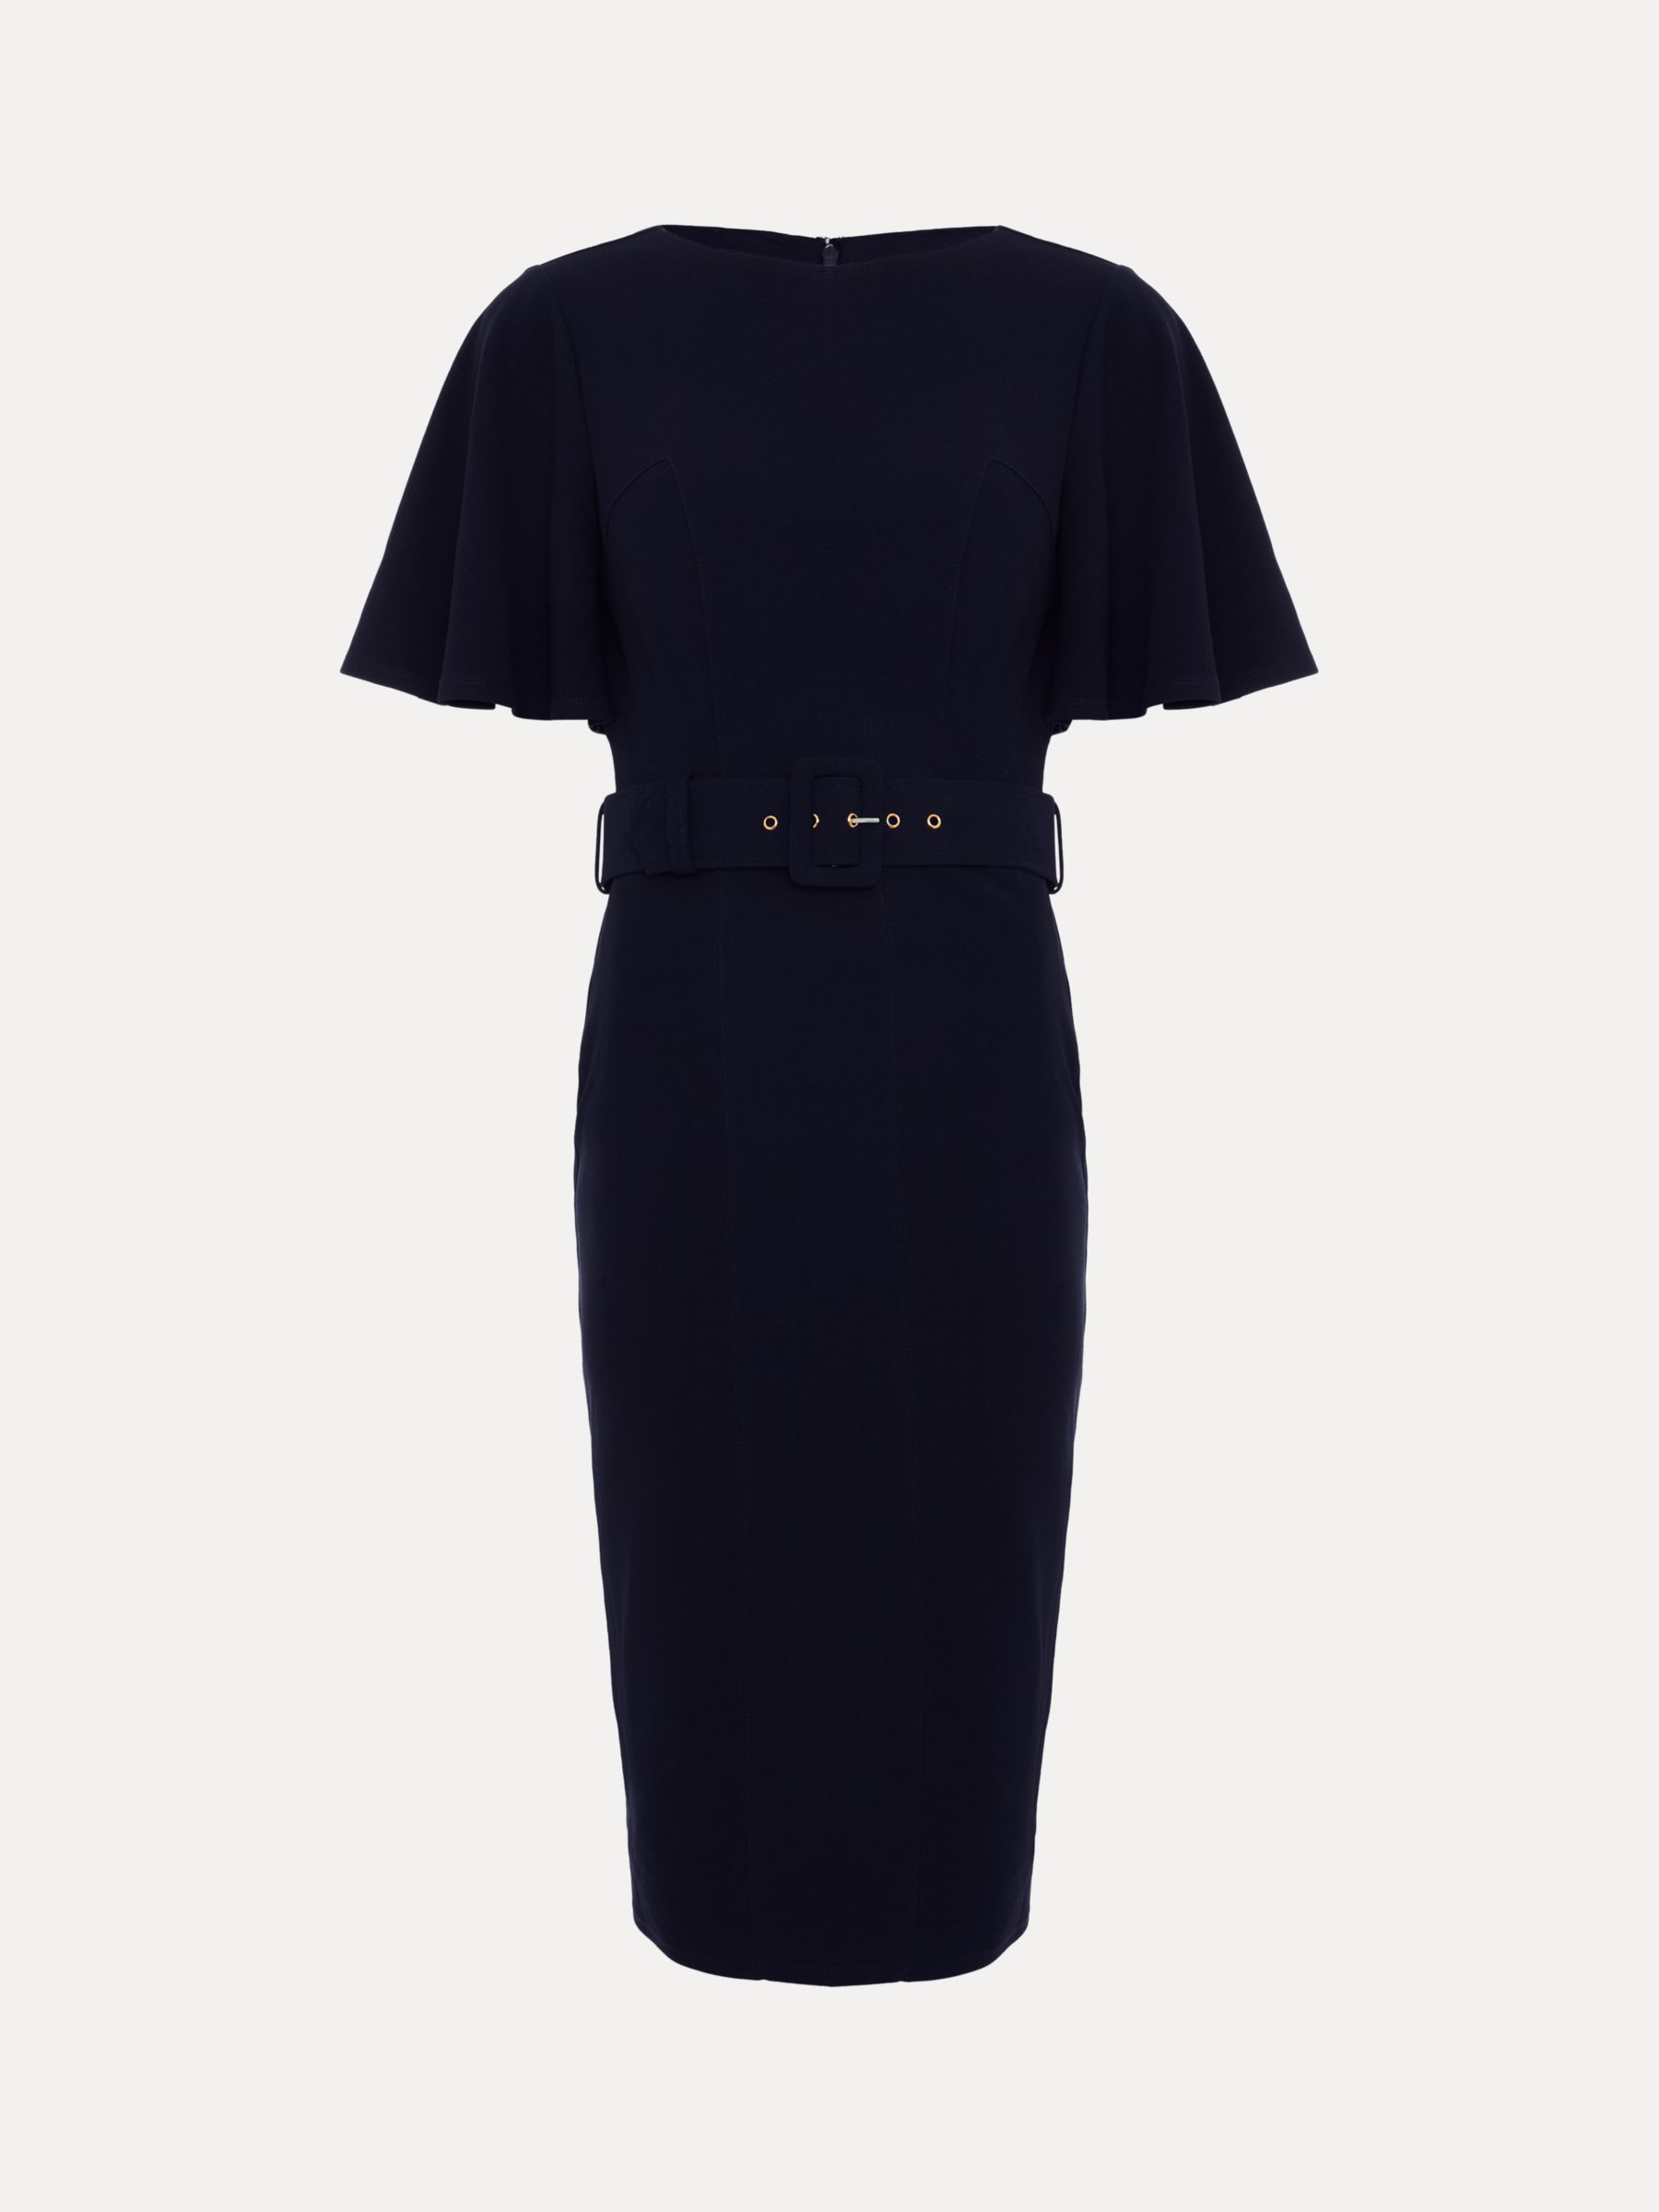 Phase Eight Fanella Belted Jersey Dress, Navy, 26